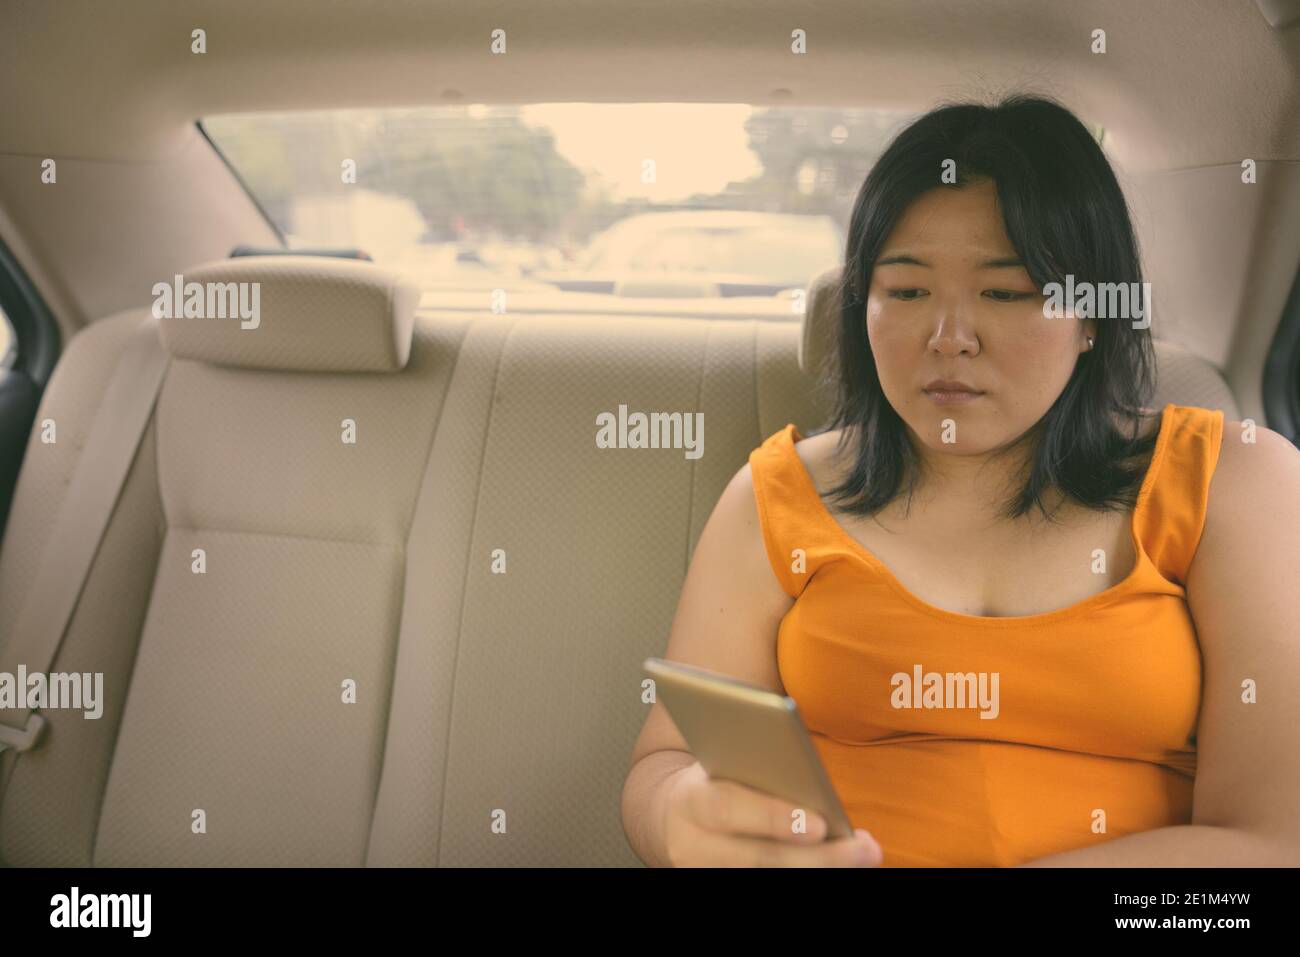 Beautiful overweight Asian woman inside the car around the city Stock Photo